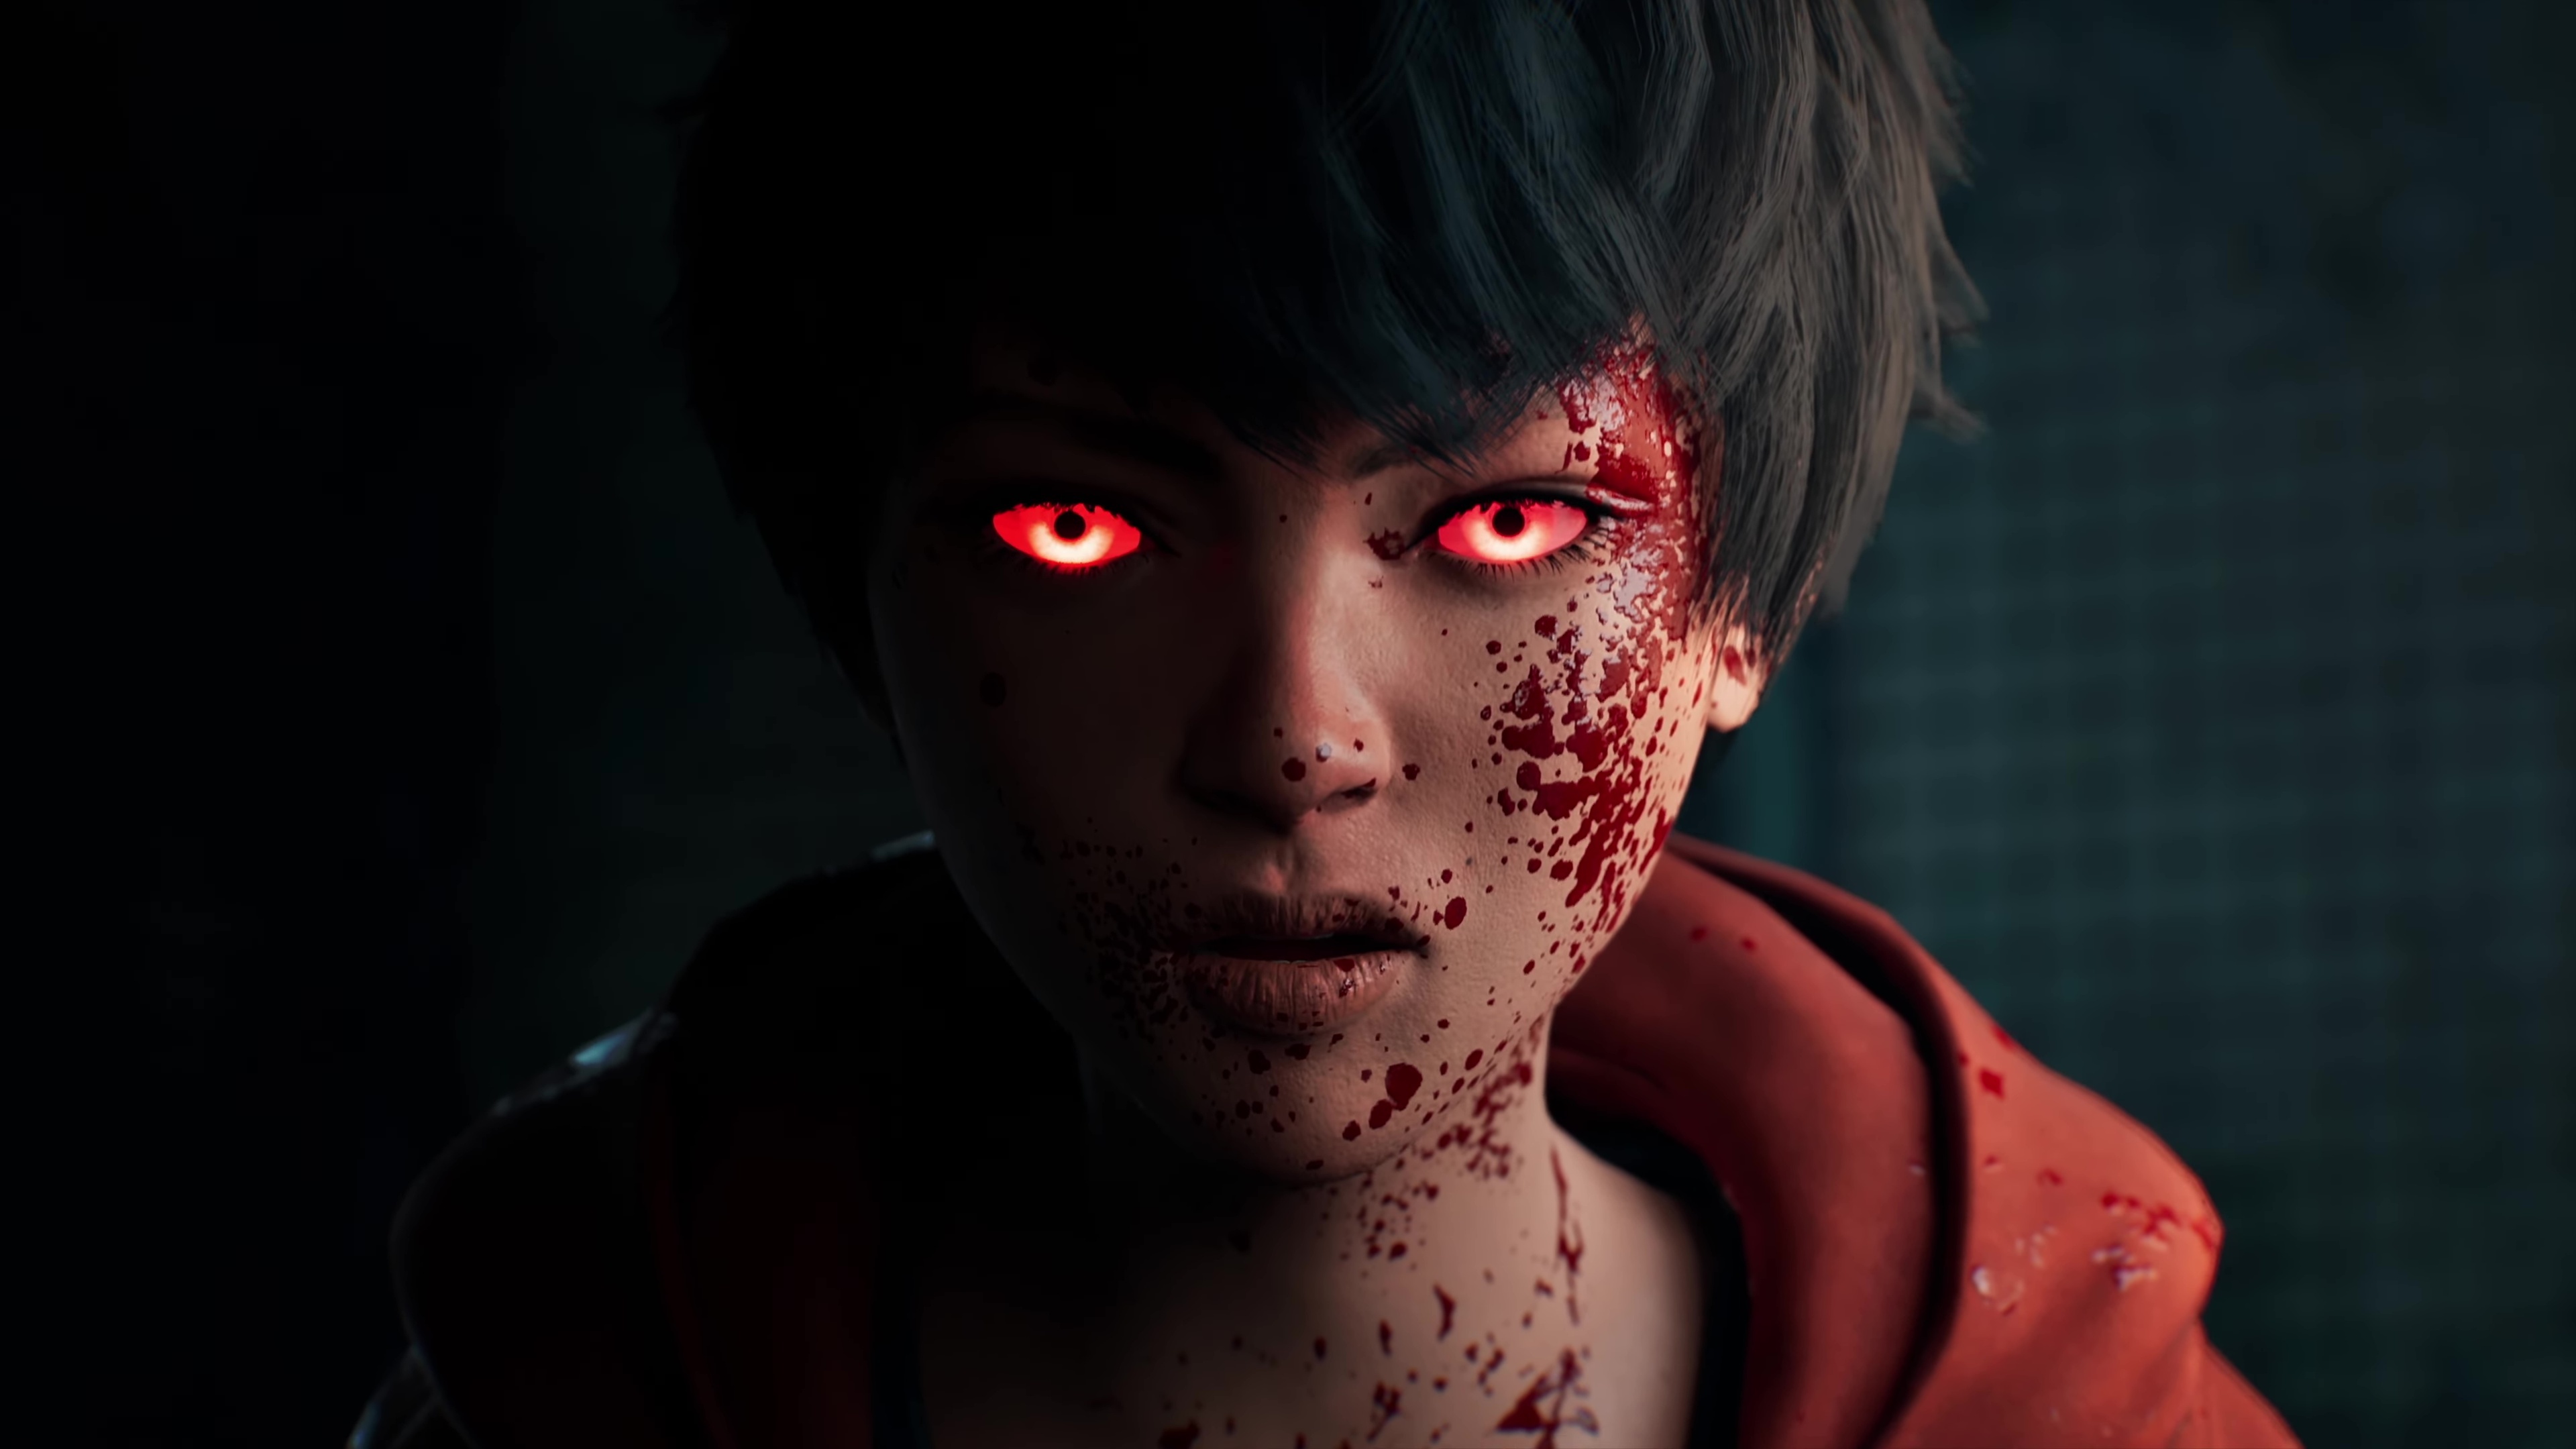 A young person with glowing red eyes, indicating their possession by a parasite, is covered with splatters of blood in a still from the trailer for Slitterhead